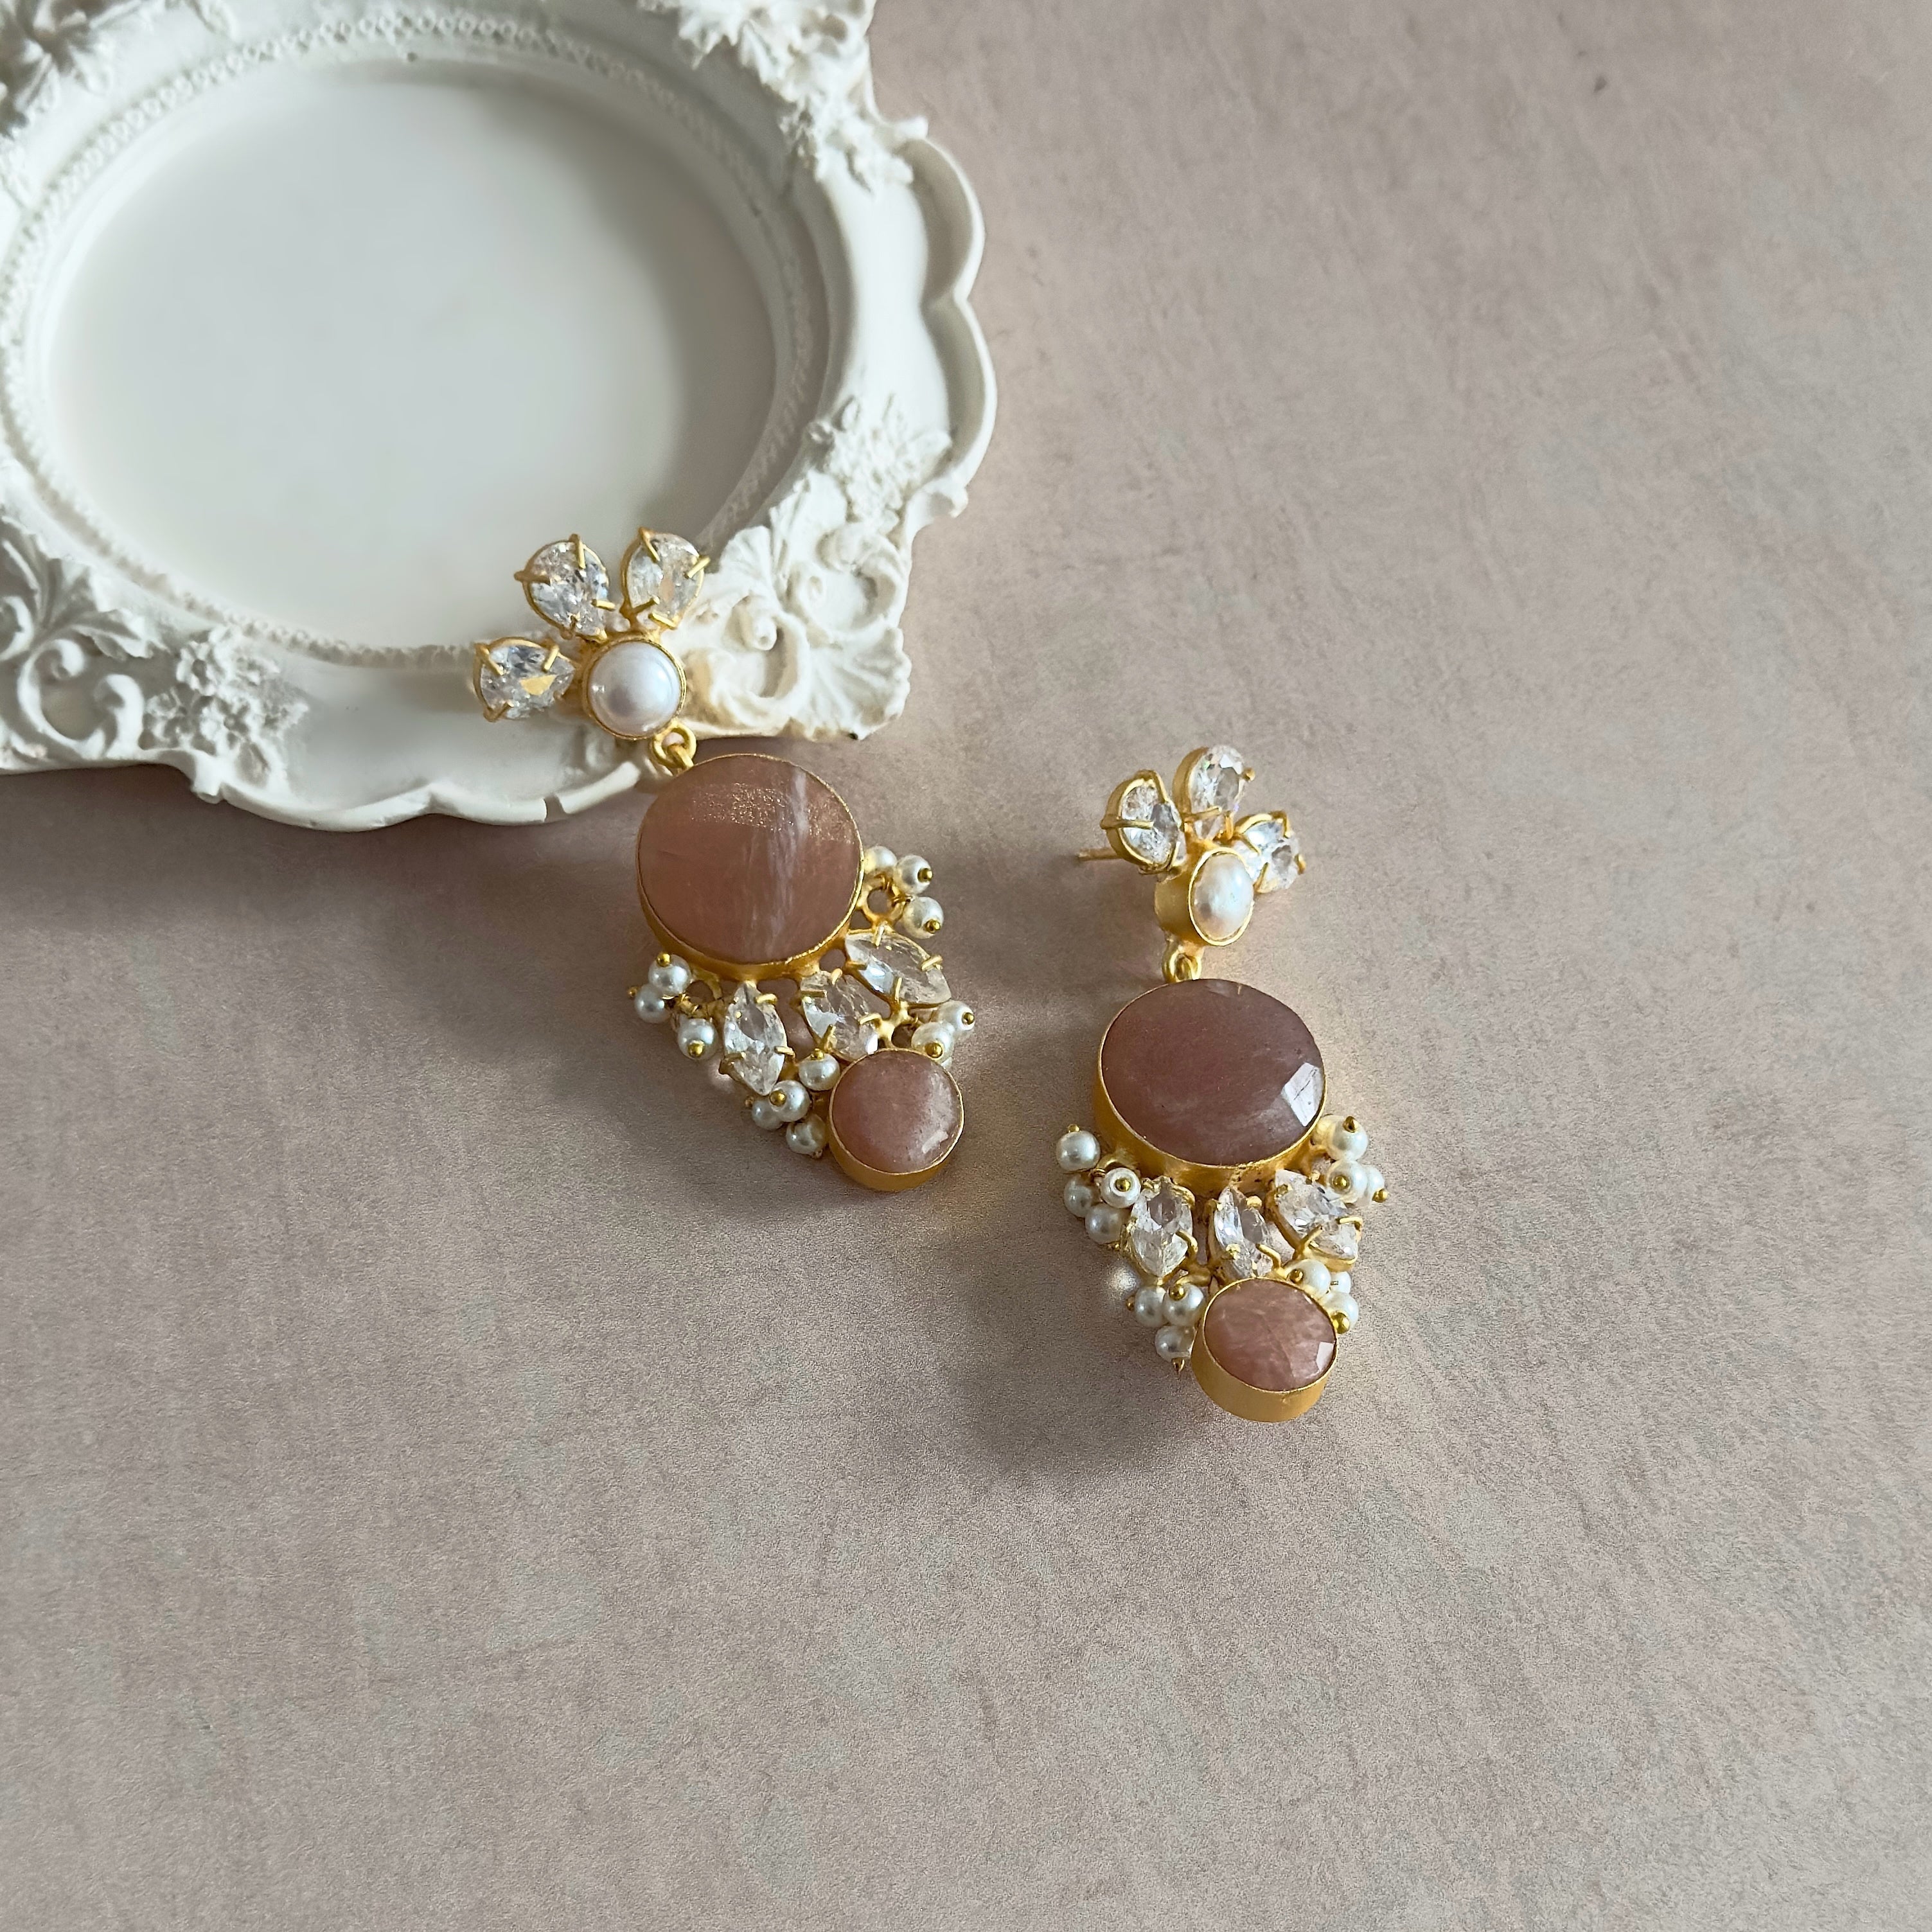 Indulge in these Peachy Crystal Drop Earrings and elevate your style with their stunning peachy hues! Adorned with sparkling cz crystals and delicate pearl accents, these earrings are perfect for adding a touch of elegance and glamour to any outfit. A must-have for any fashion lover!